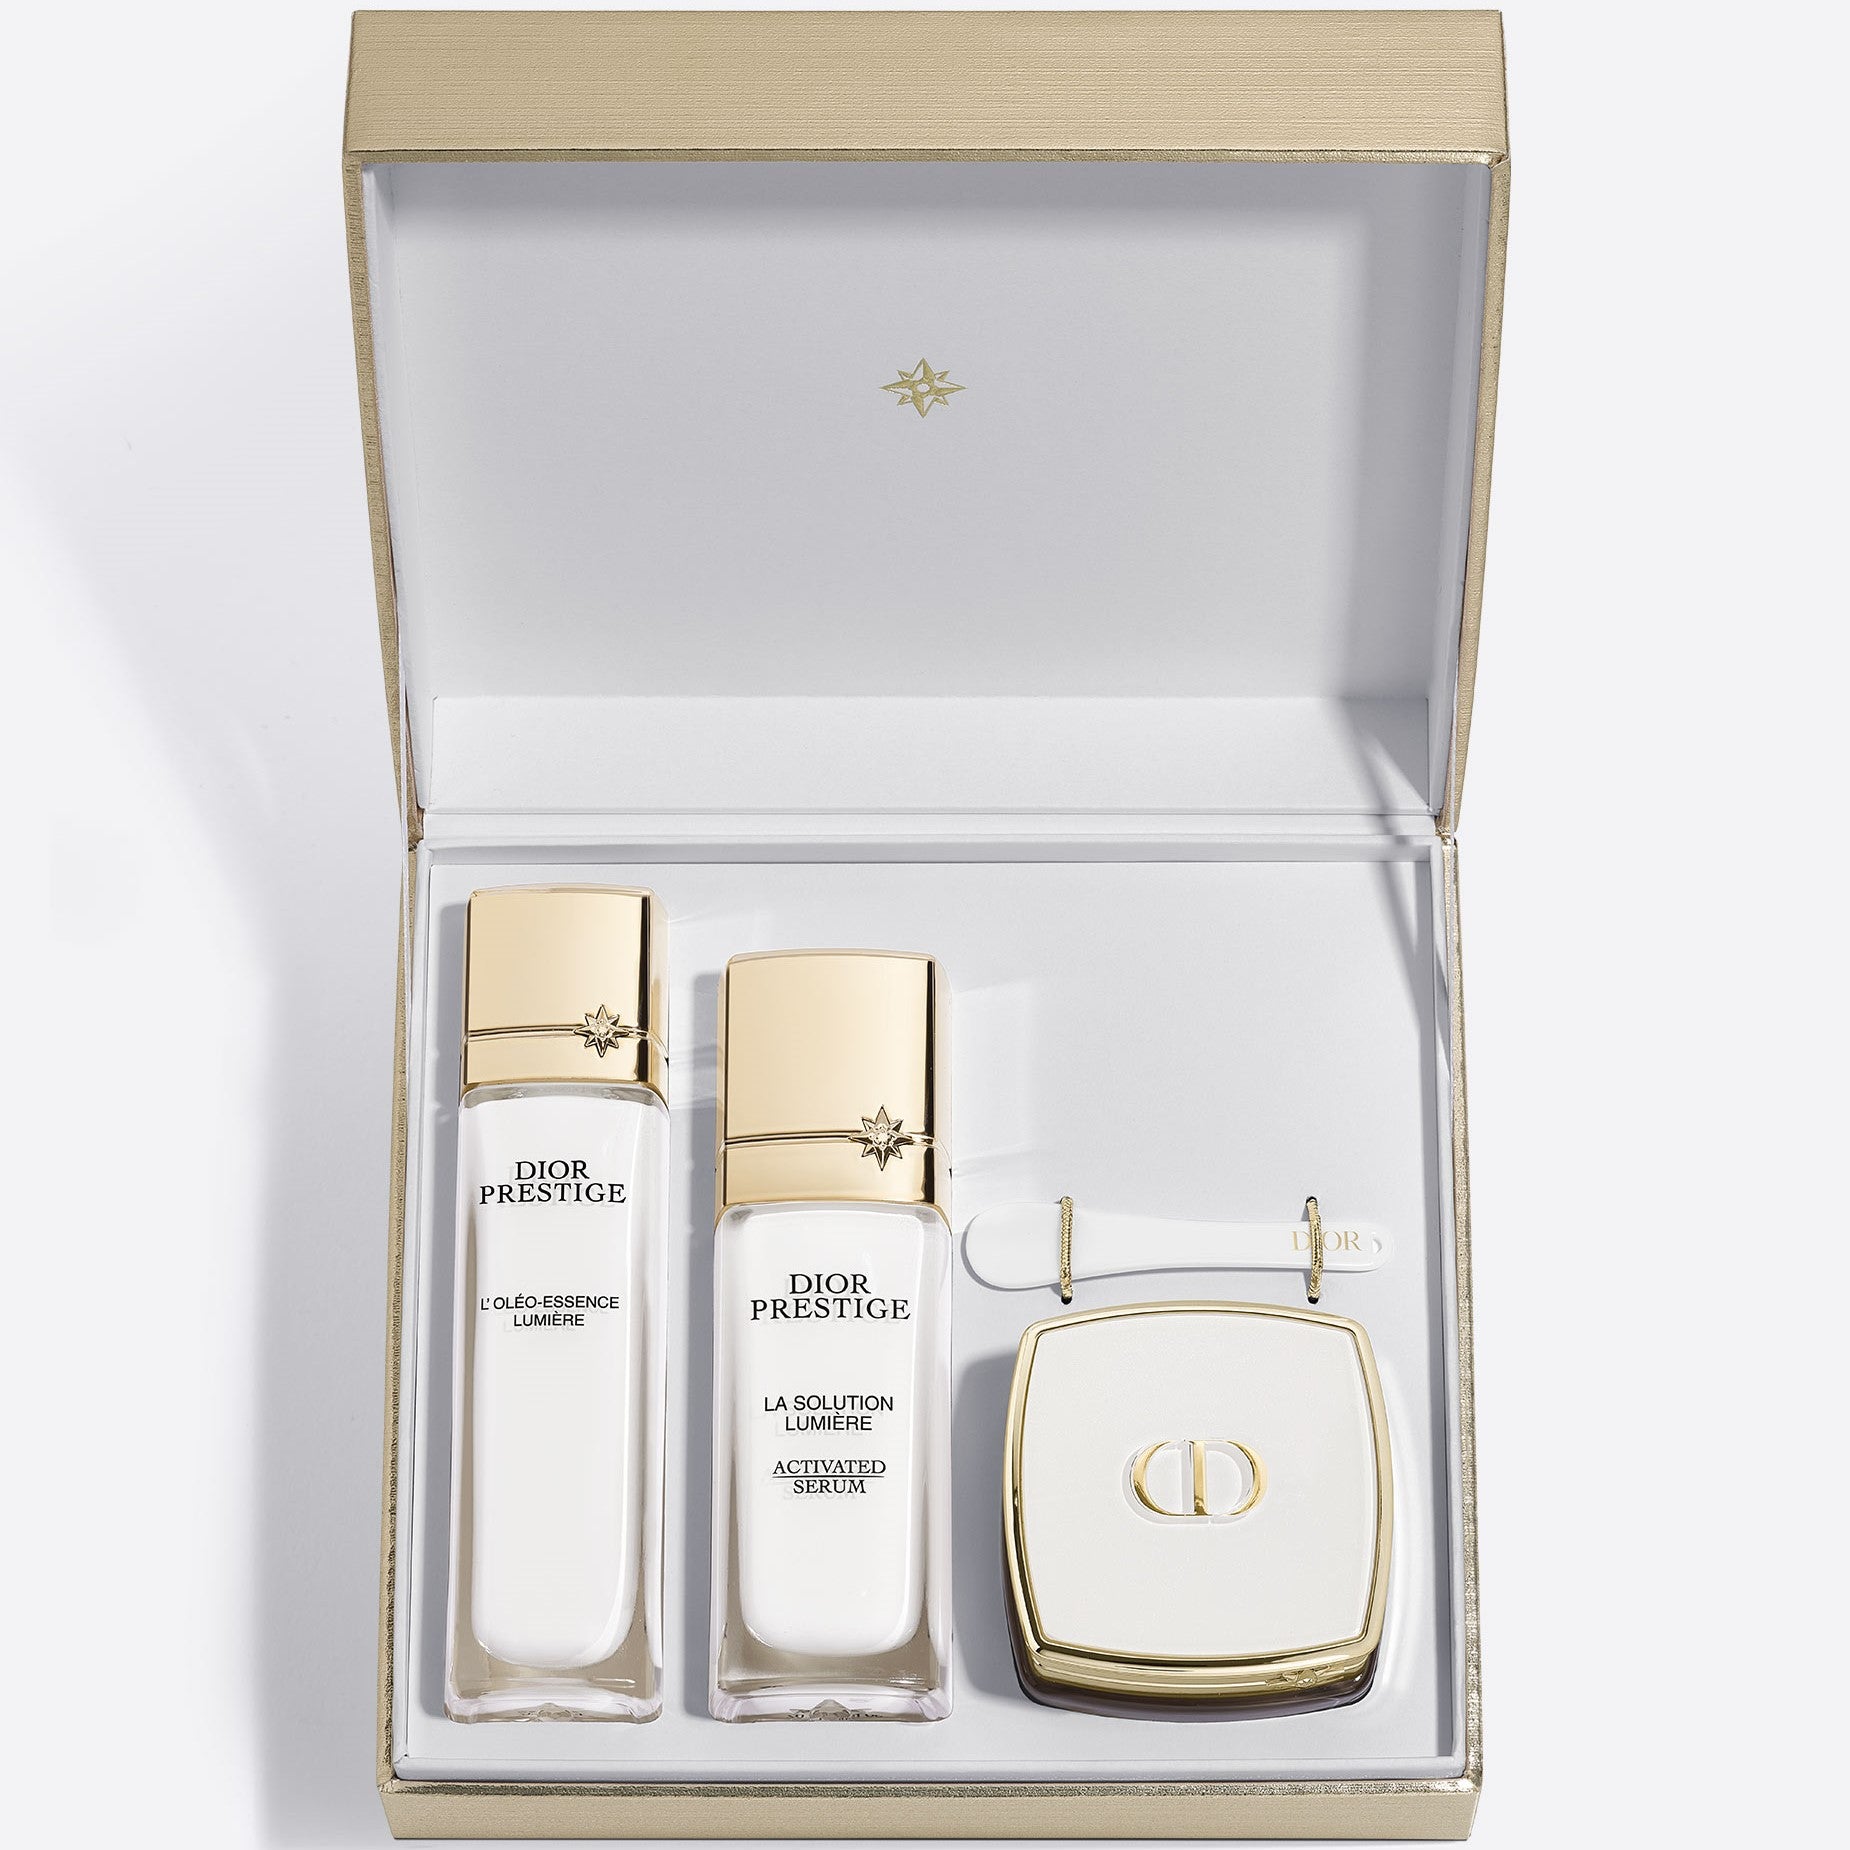 DIOR PRESTIGE – THE EXCEPTIONAL BRIGHTENING AND REVITALIZING RITUAL ~ Facial Skincare Set – Exfoliating Lotion, Serum and Emulsion